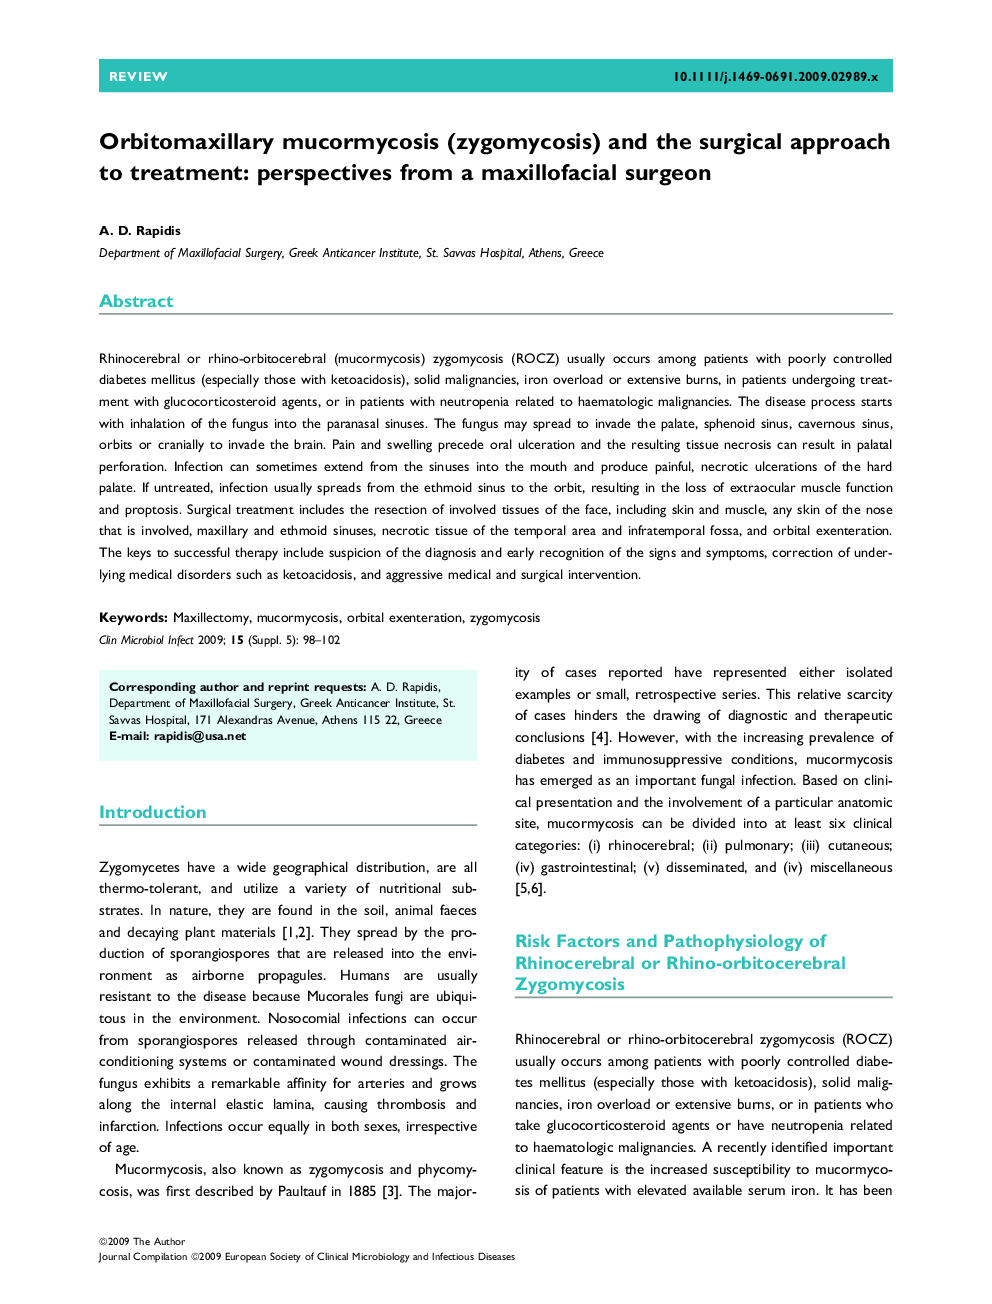 Orbitomaxillary mucormycosis (zygomycosis) and the surgical approach to treatment: perspectives from a maxillofacial surgeon